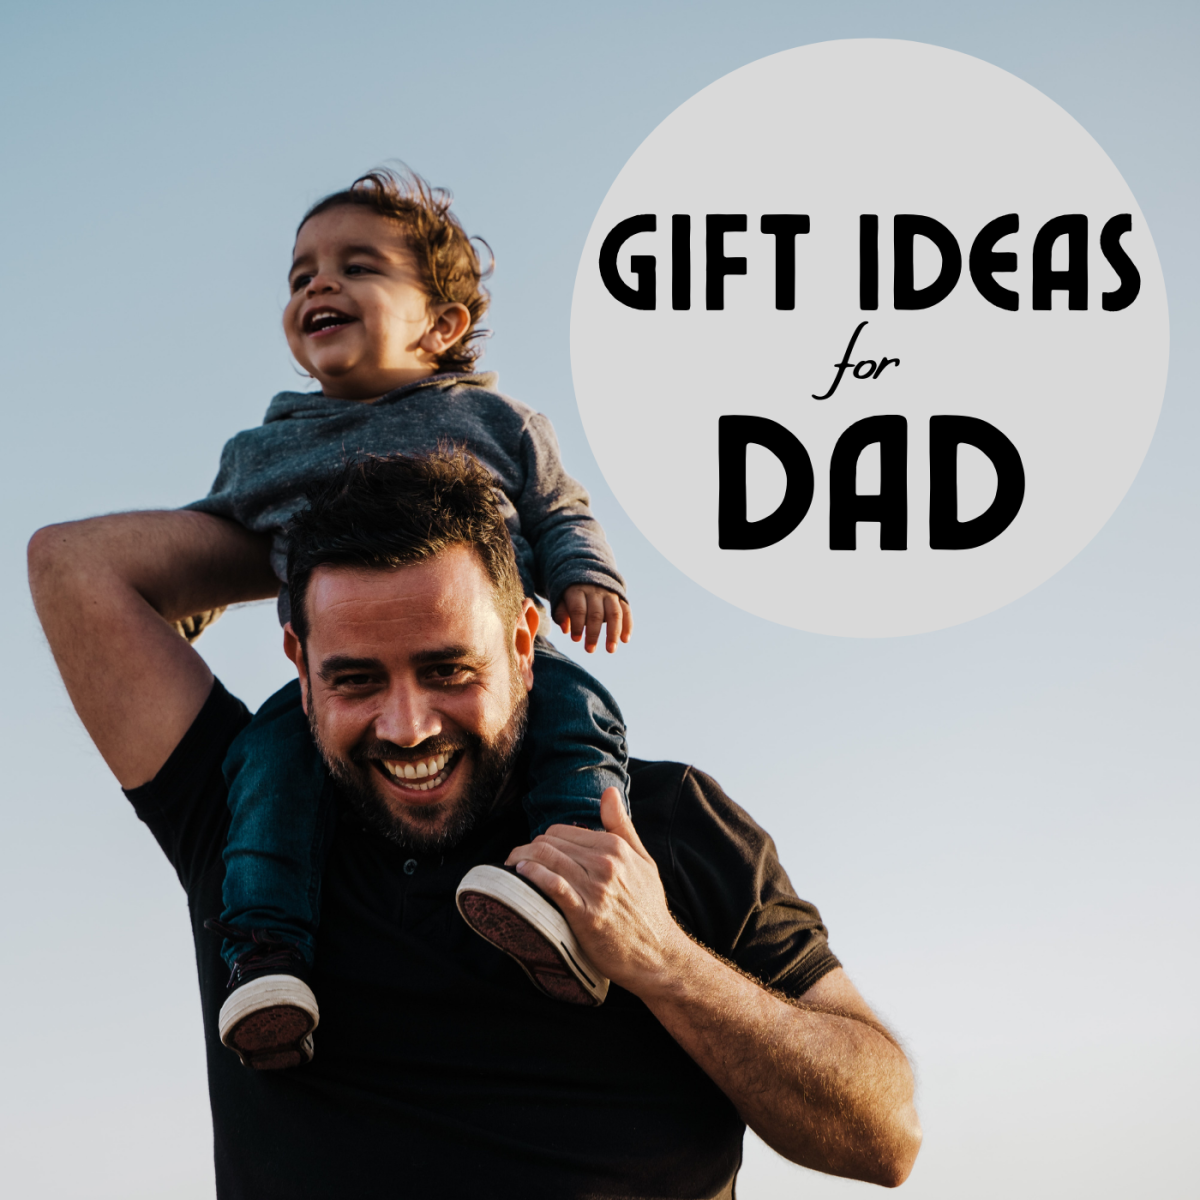 Quick, Easy, and Thoughtful Gift Ideas for Dad